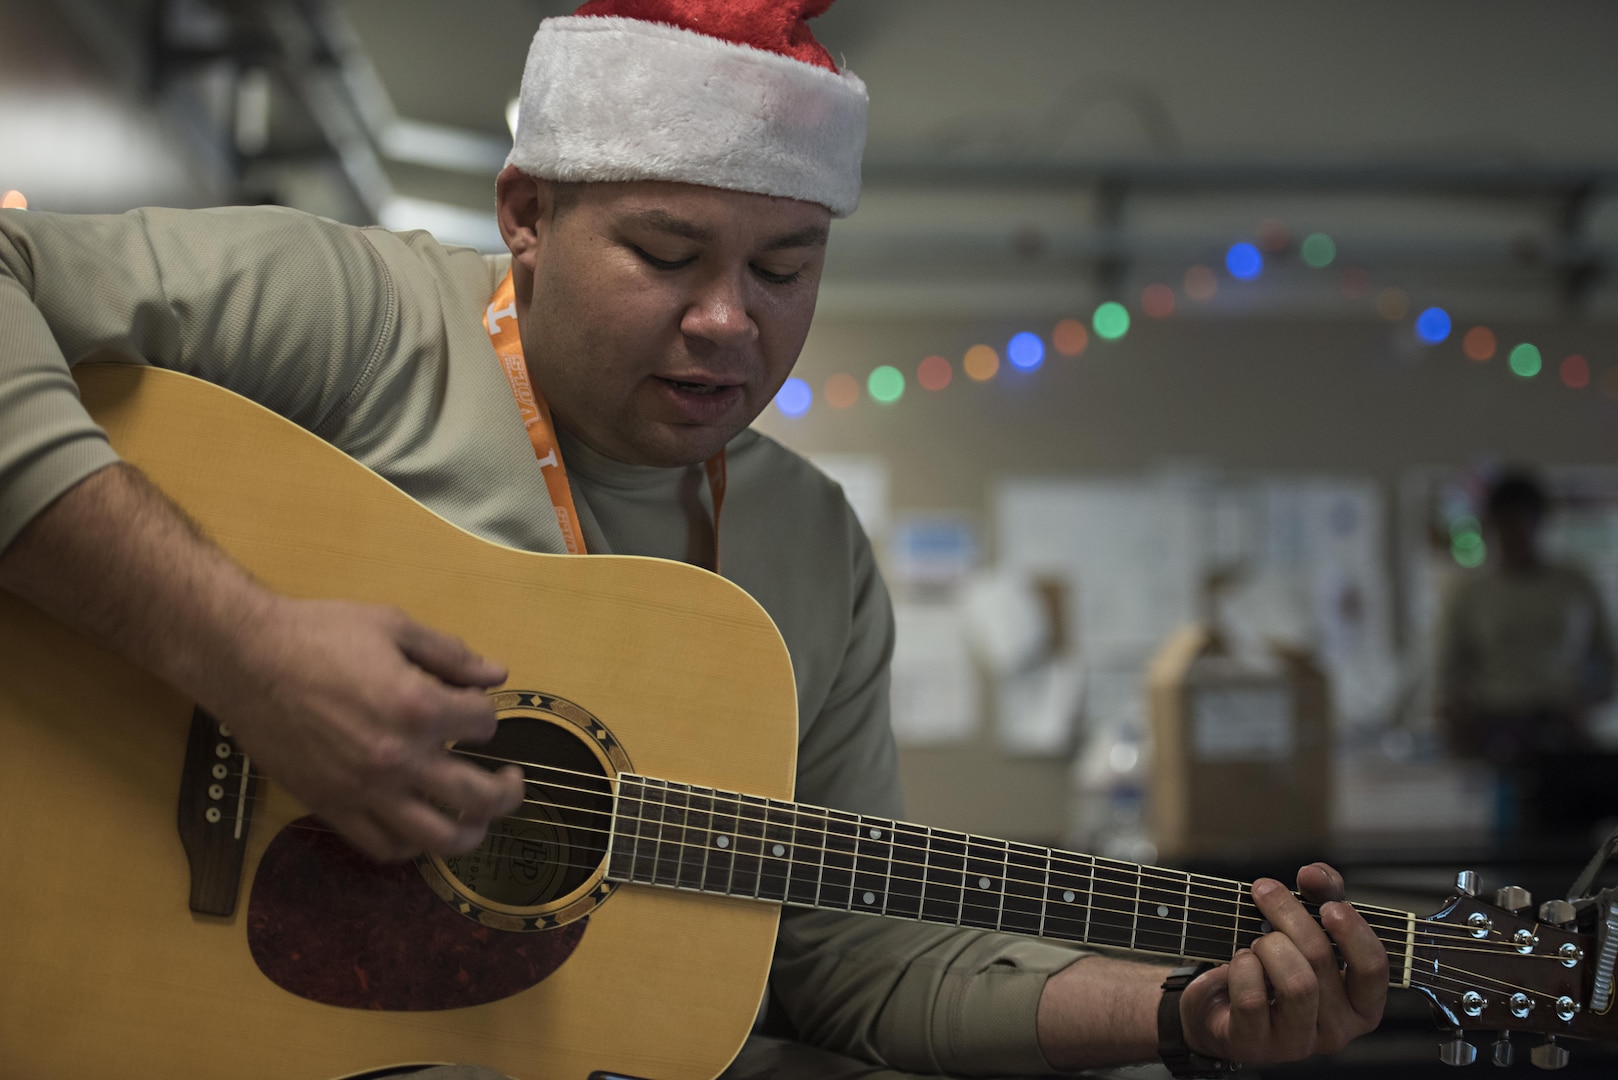 Tech. Sgt. Joe Collett, 455th Expeditionary Aircraft Maintenance Squadron expeditor, plays Christmas Carols Dec. 25, 2016 at Bagram Airfield, Afghanistan. The mission continued over the holiday, but service members took time to celebrate the holiday by talking with their families and spending time with their units. (U.S. Air Force photo by Staff Sgt. Katherine Spessa)